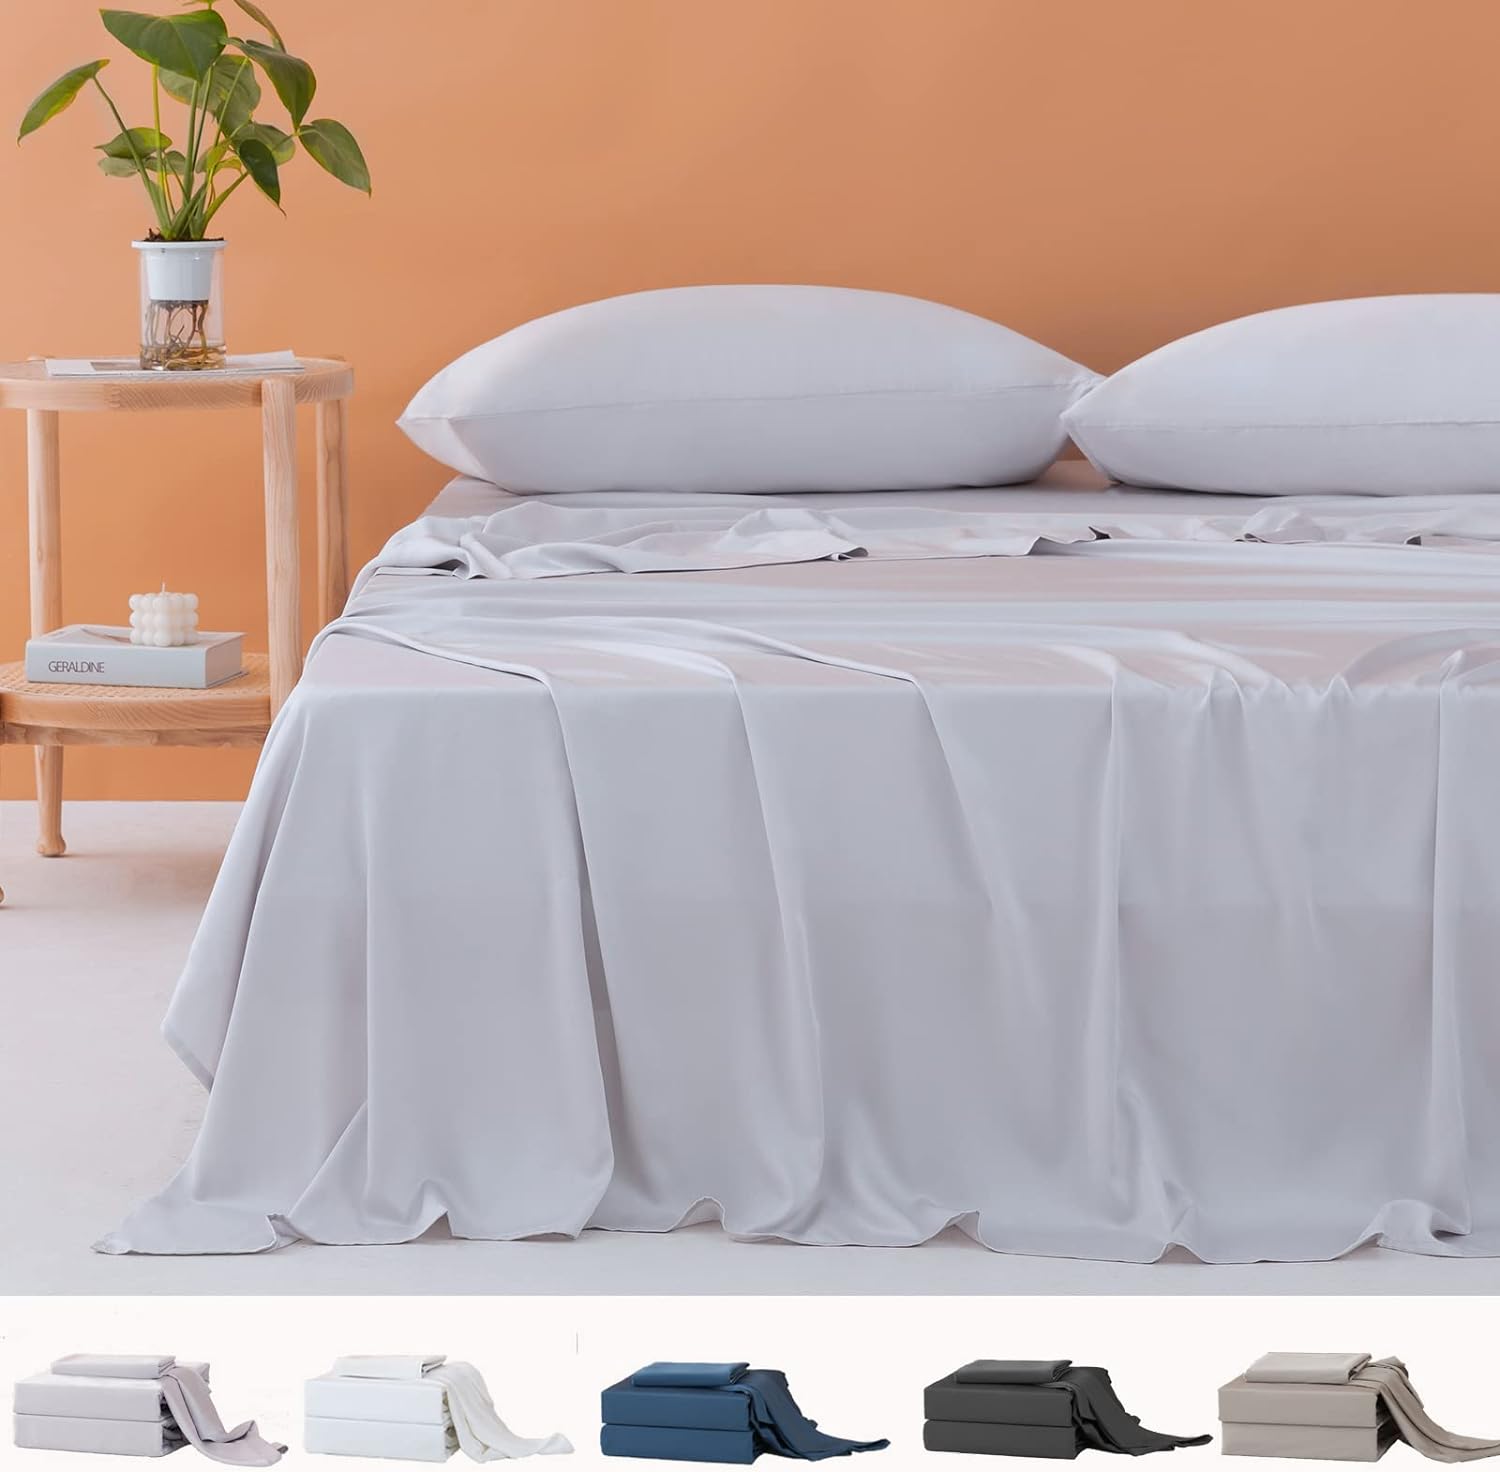 Bedbay Queen Sheet Set Bamboo Viscose,Silky Soft Cooling Sheets for Hot Sleepers,Luxury Queen Bed Sheets Deep Pocket Up to 16,1 Flat Sheet,1 Fitted Sheet,2 Pillowcases-Silvery Grey,Queen